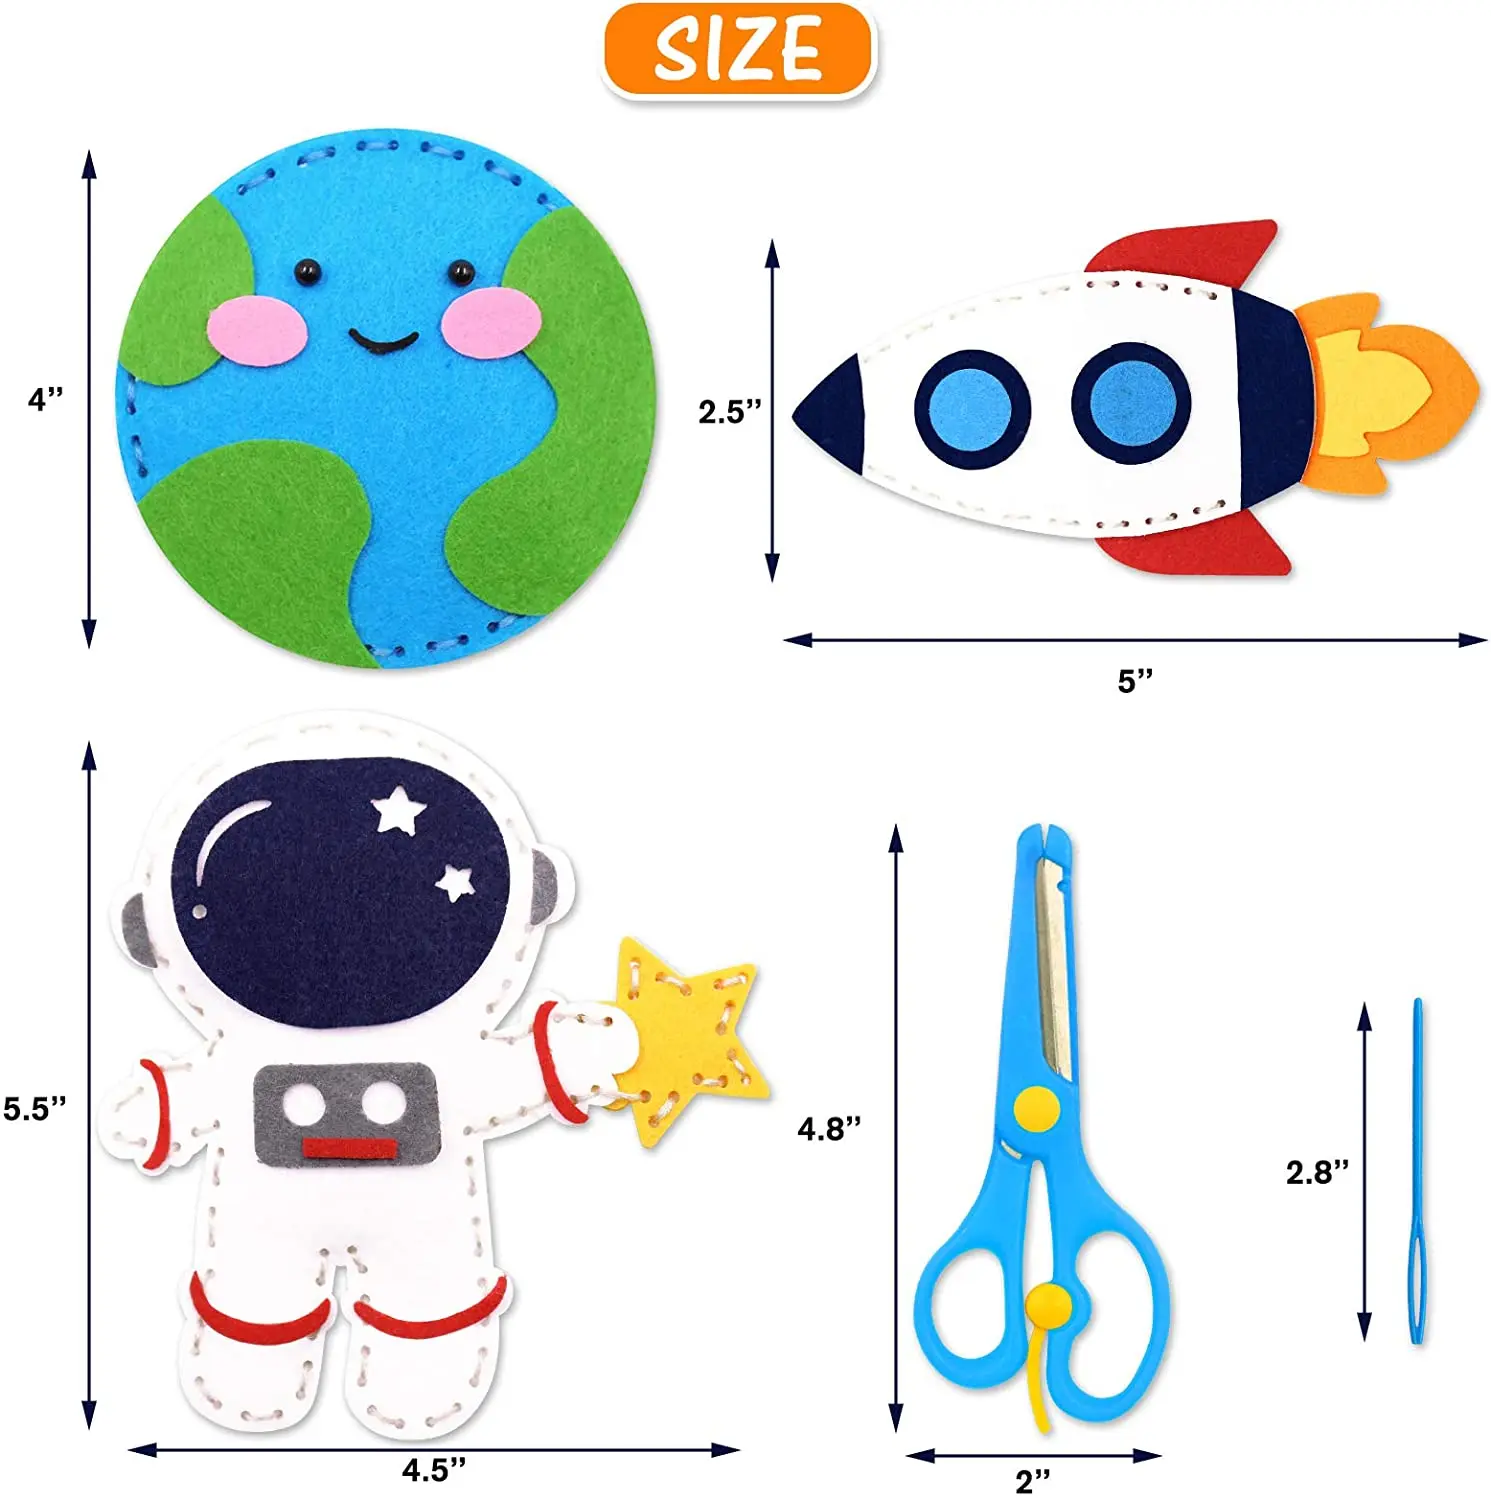 
Space Sewing Kit for Kids Solar System DIY Activity Felt Art Craft Supplies for Girls and Boys Educational Beginners Sewing Set 